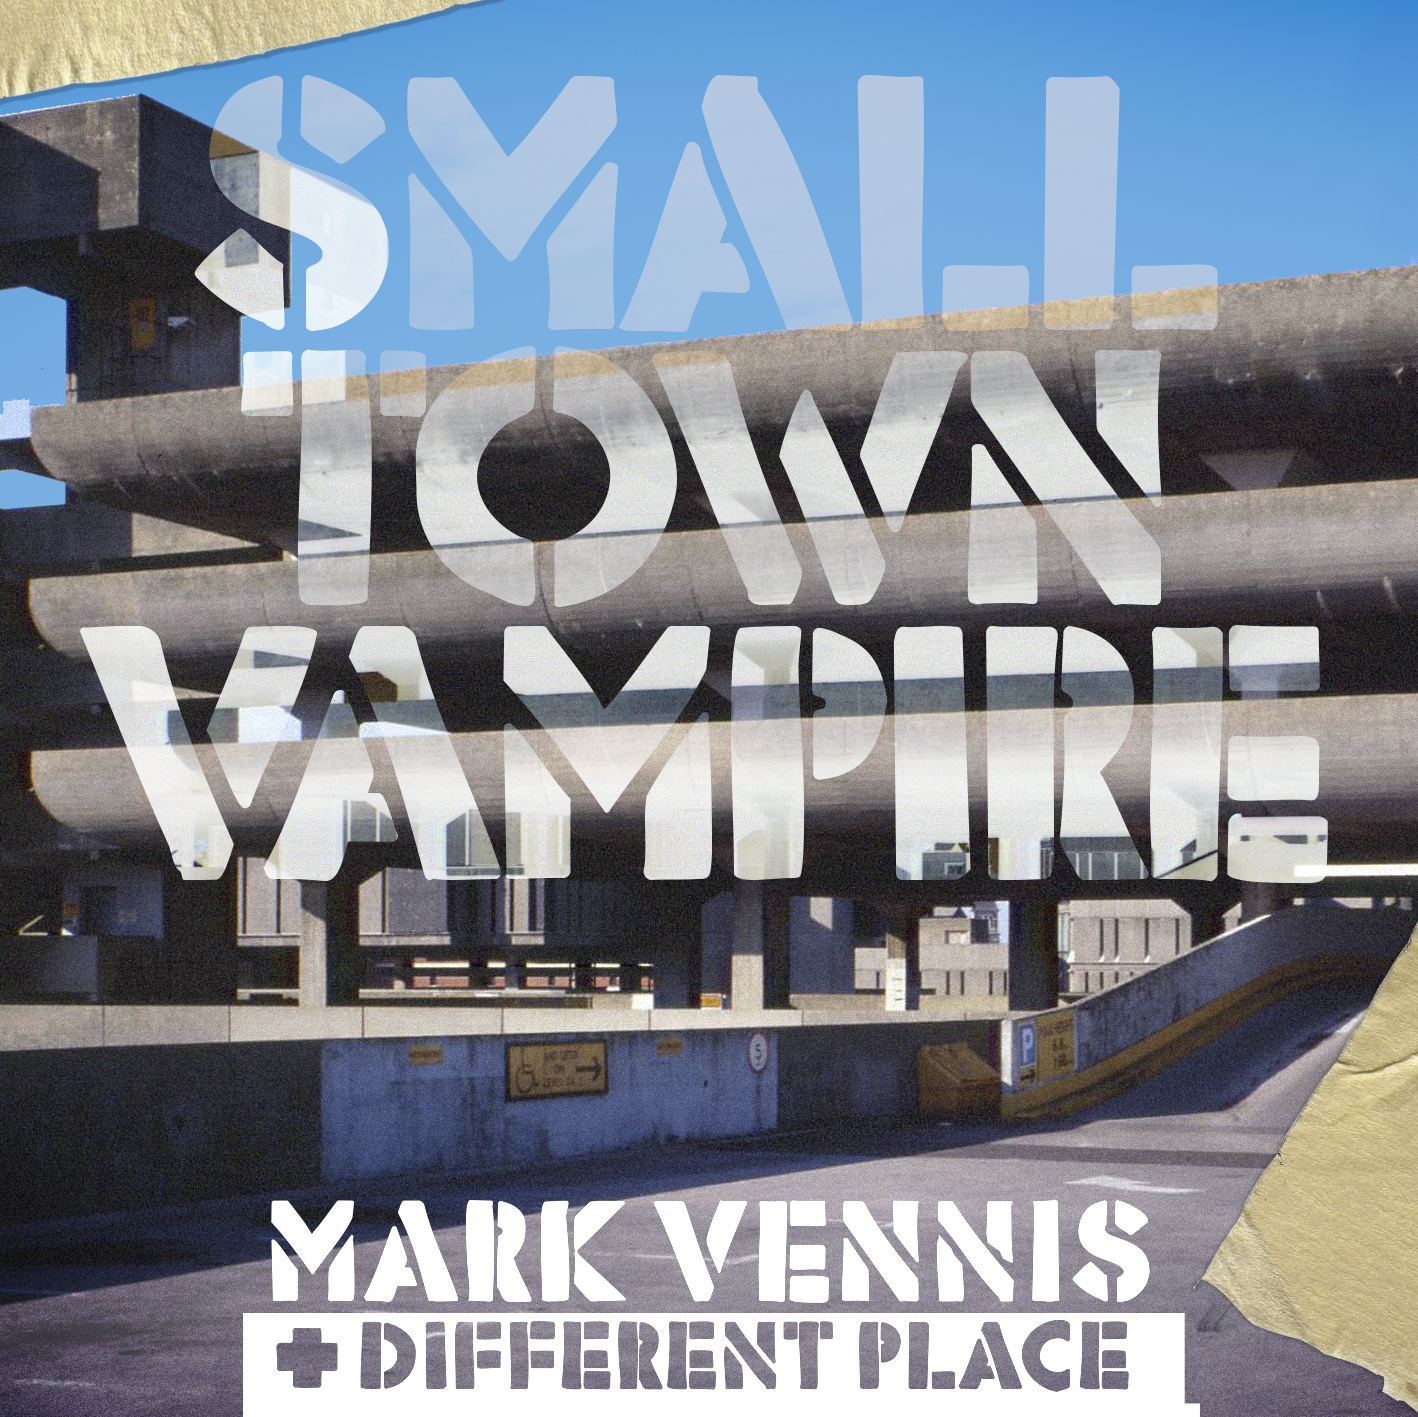 SMALL TOWN VAMPIRE by MARK VENNIS & DIFFERENT PLACE album cover art